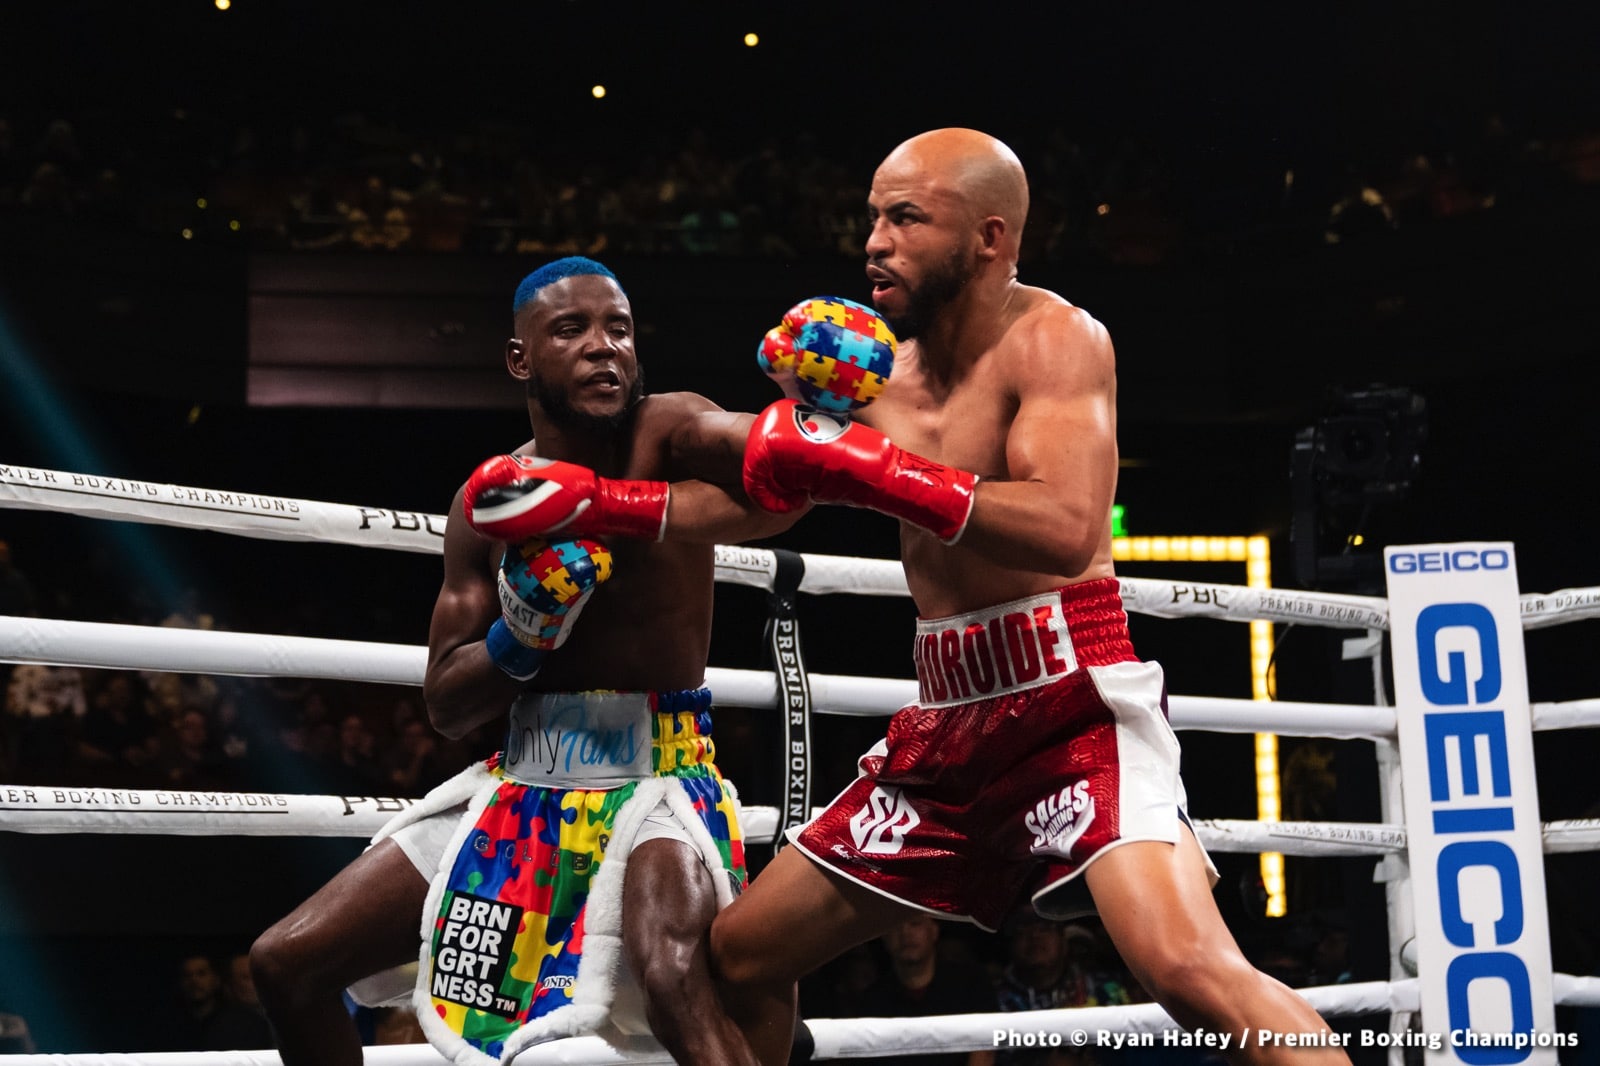 Image: Boxing Results: Chris Colbert Loses to Hector Garcia!